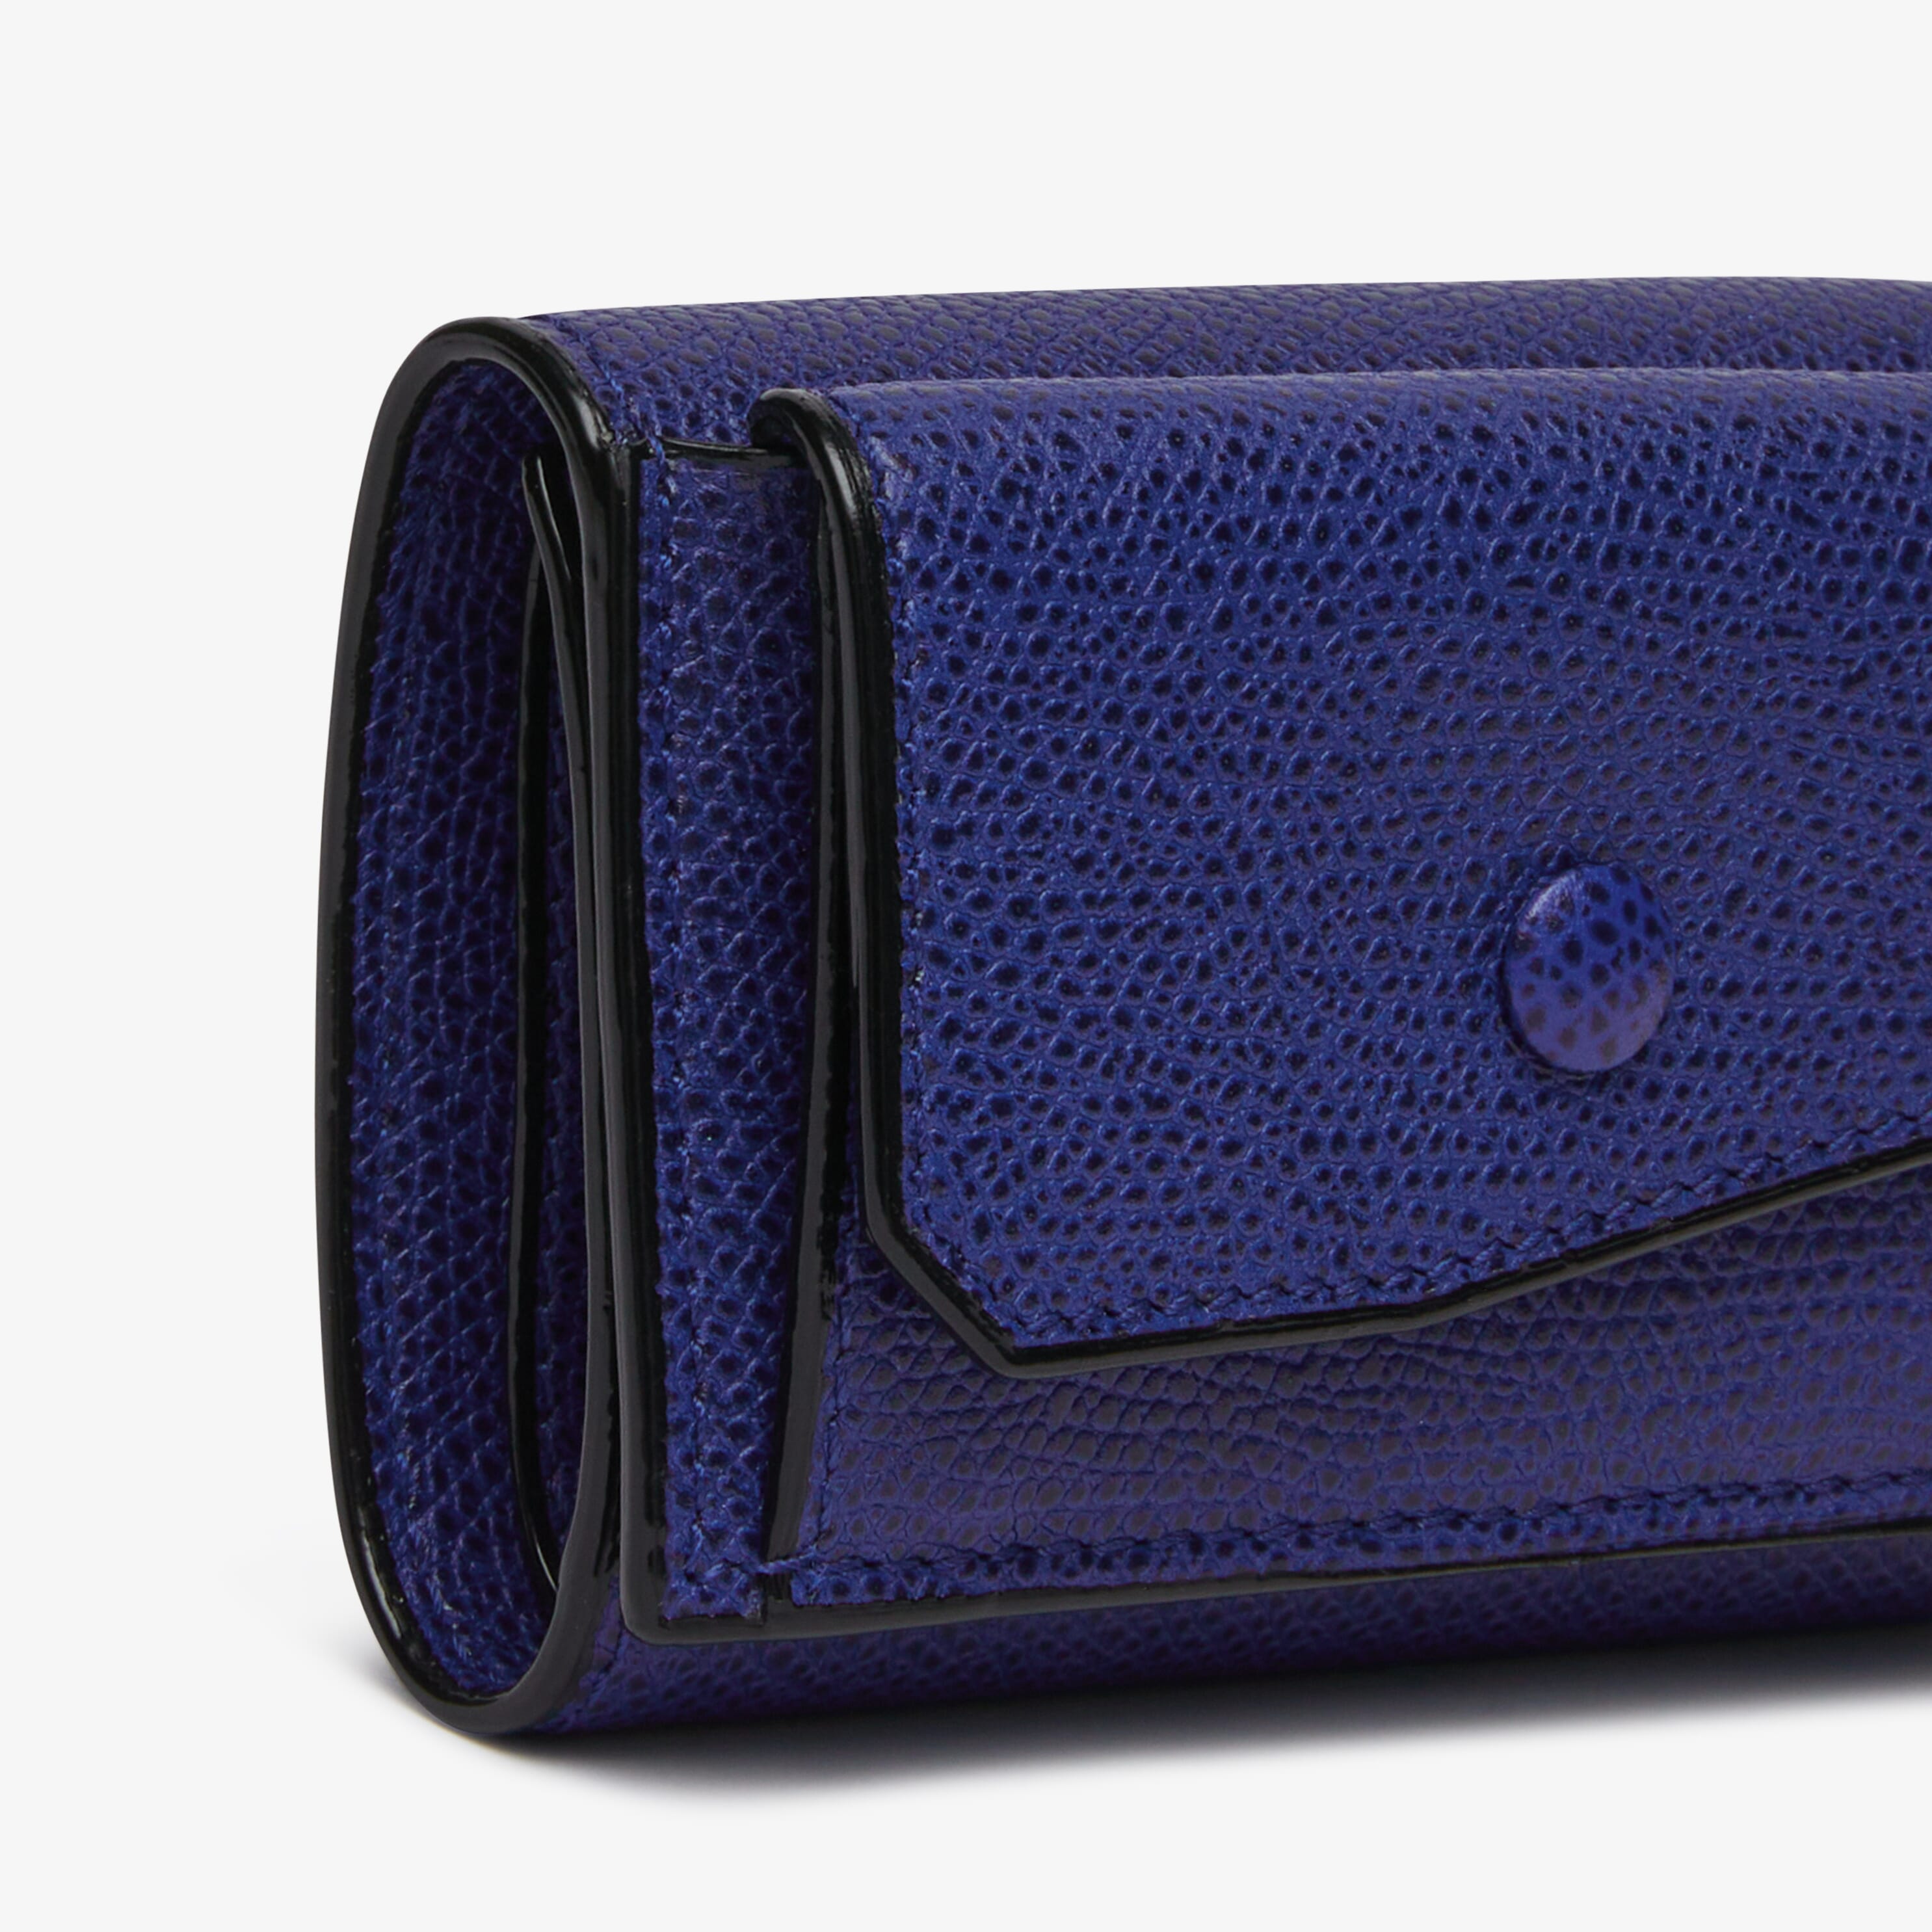 Valextra Small Wallet with Coin Holder